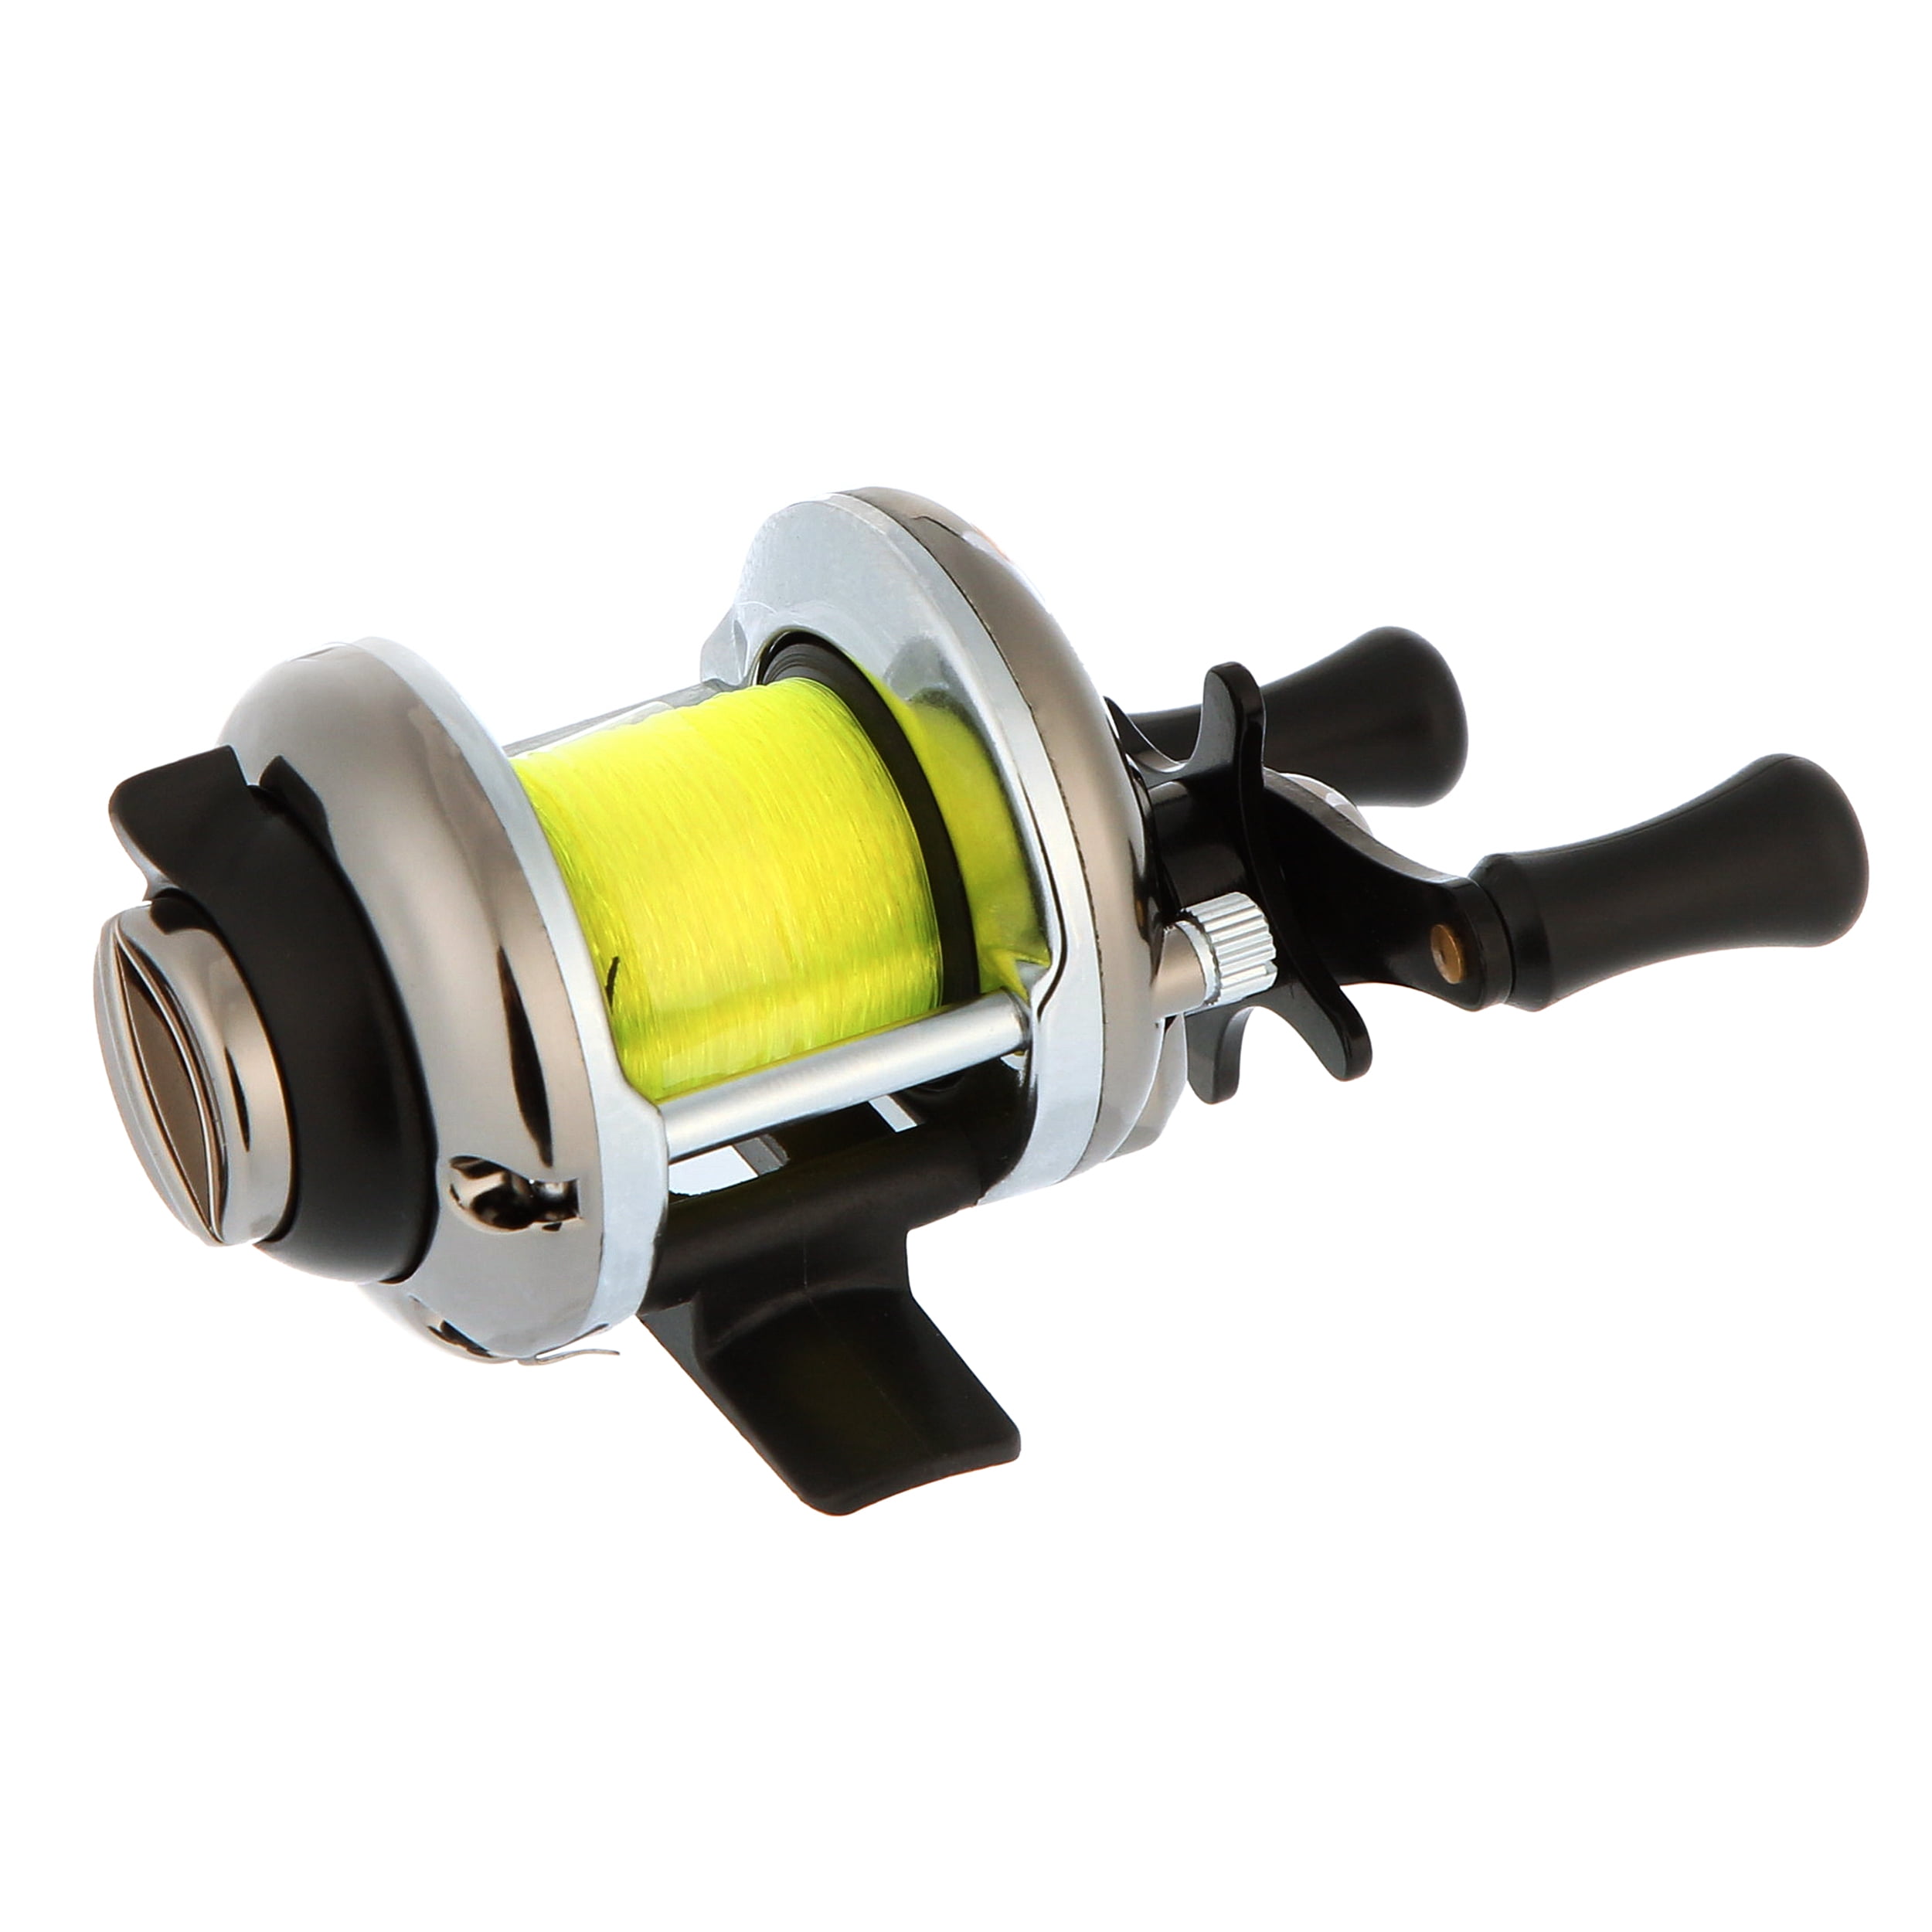 Mr. Crappie Slab Daddy Crappie Fishing Reel Pre-Spooled Line